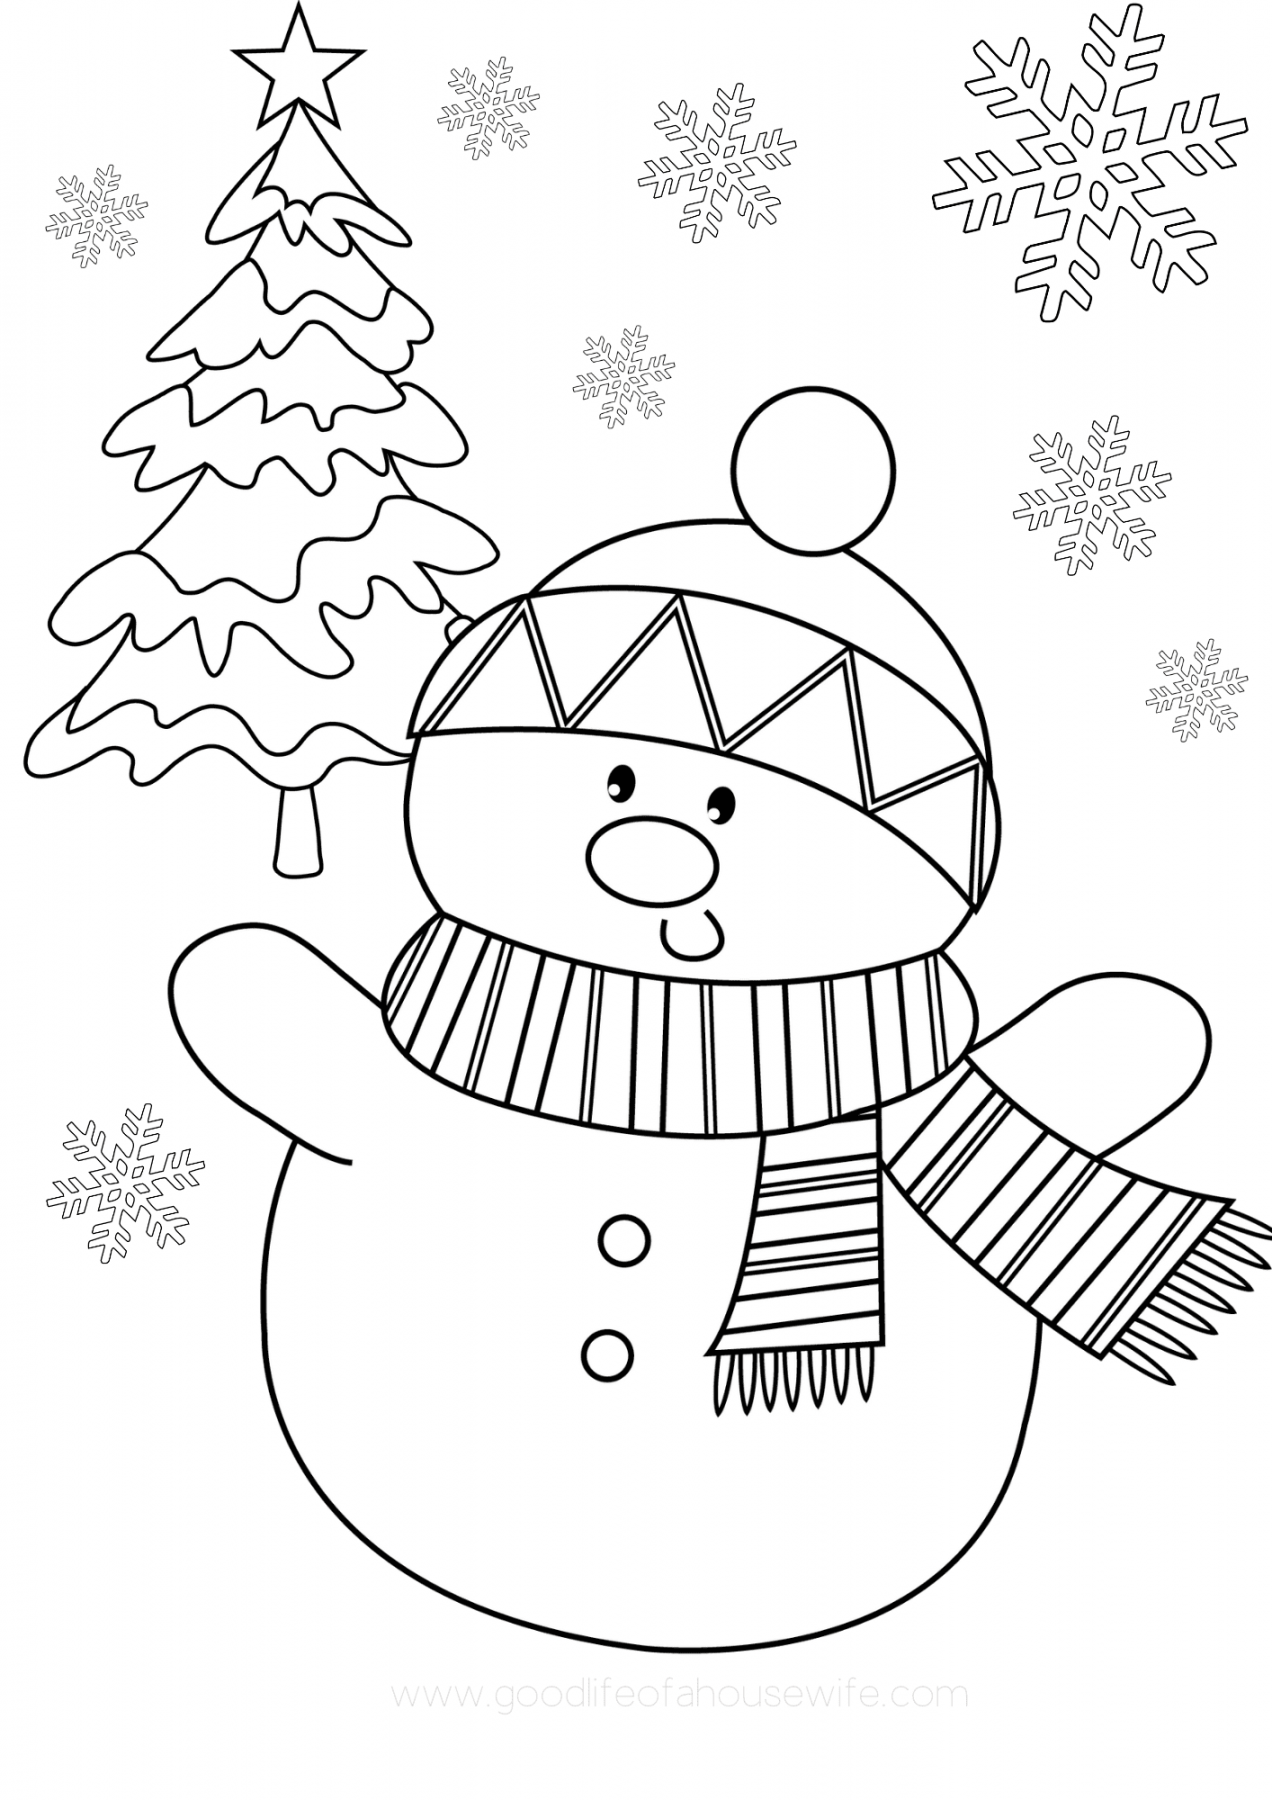 Free Printable Christmas Coloring Pages - Good Life of a Housewife